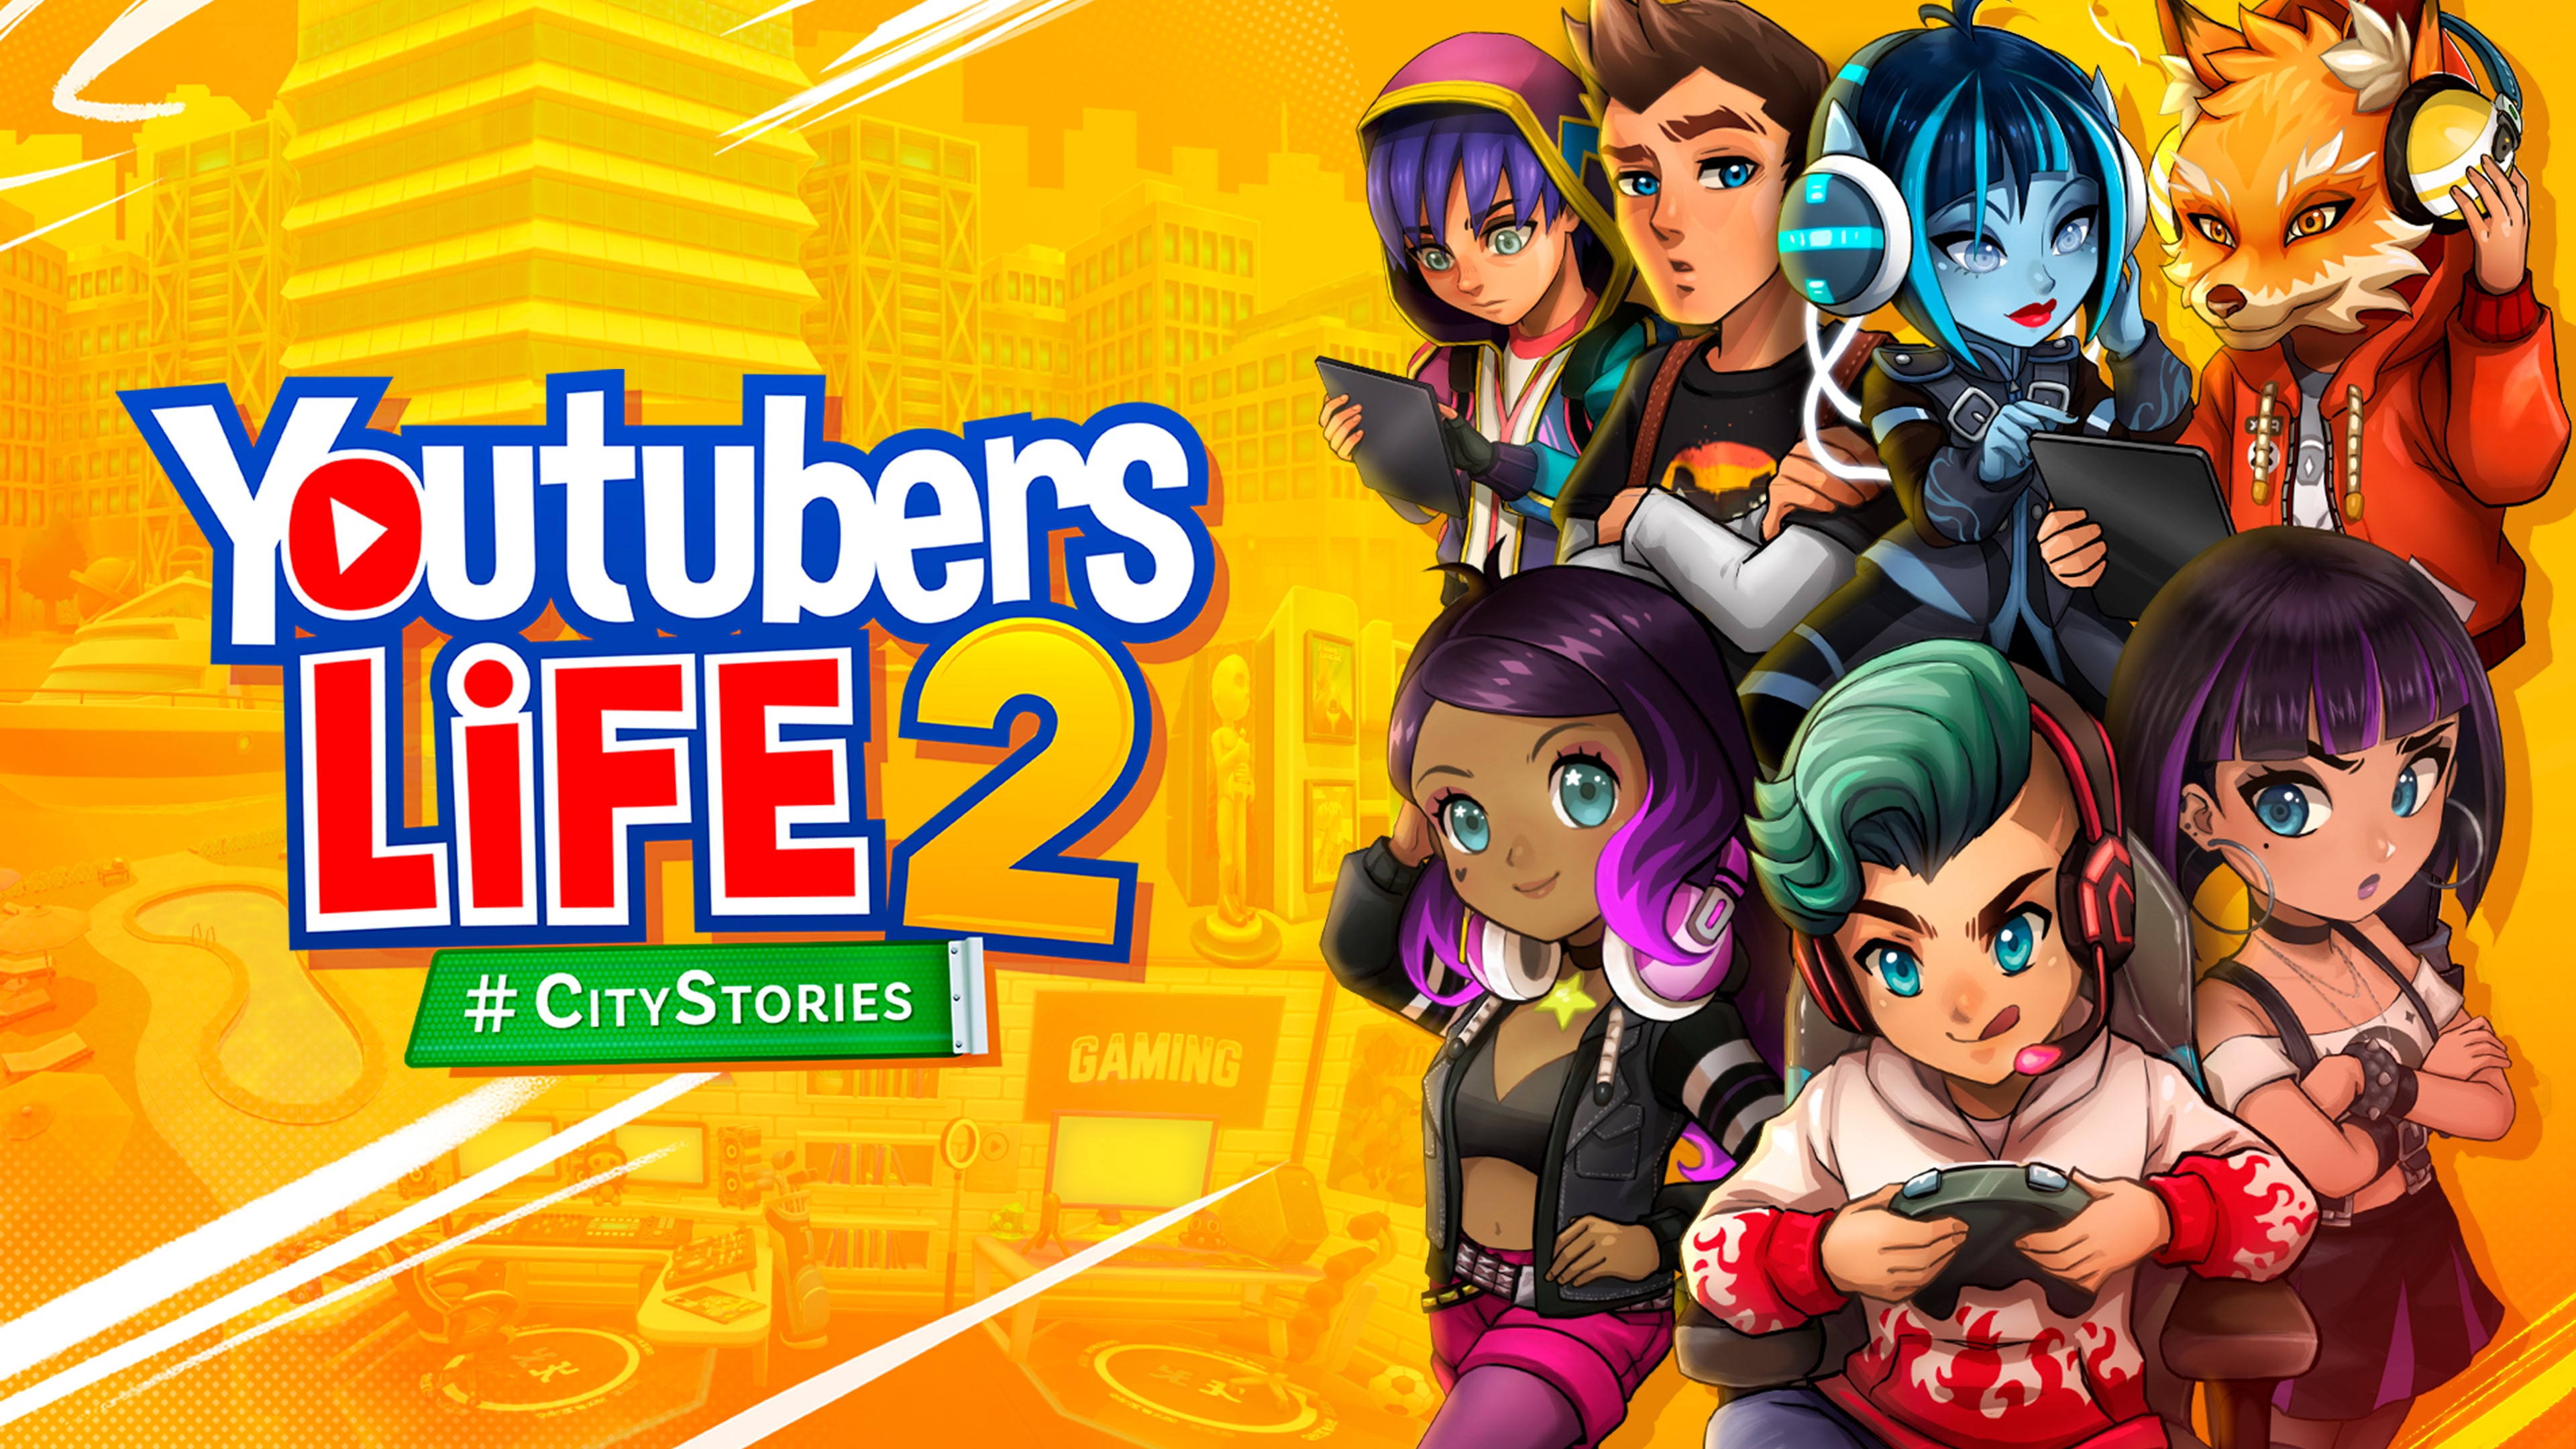  rs Life 2 (PS4) : Video Games